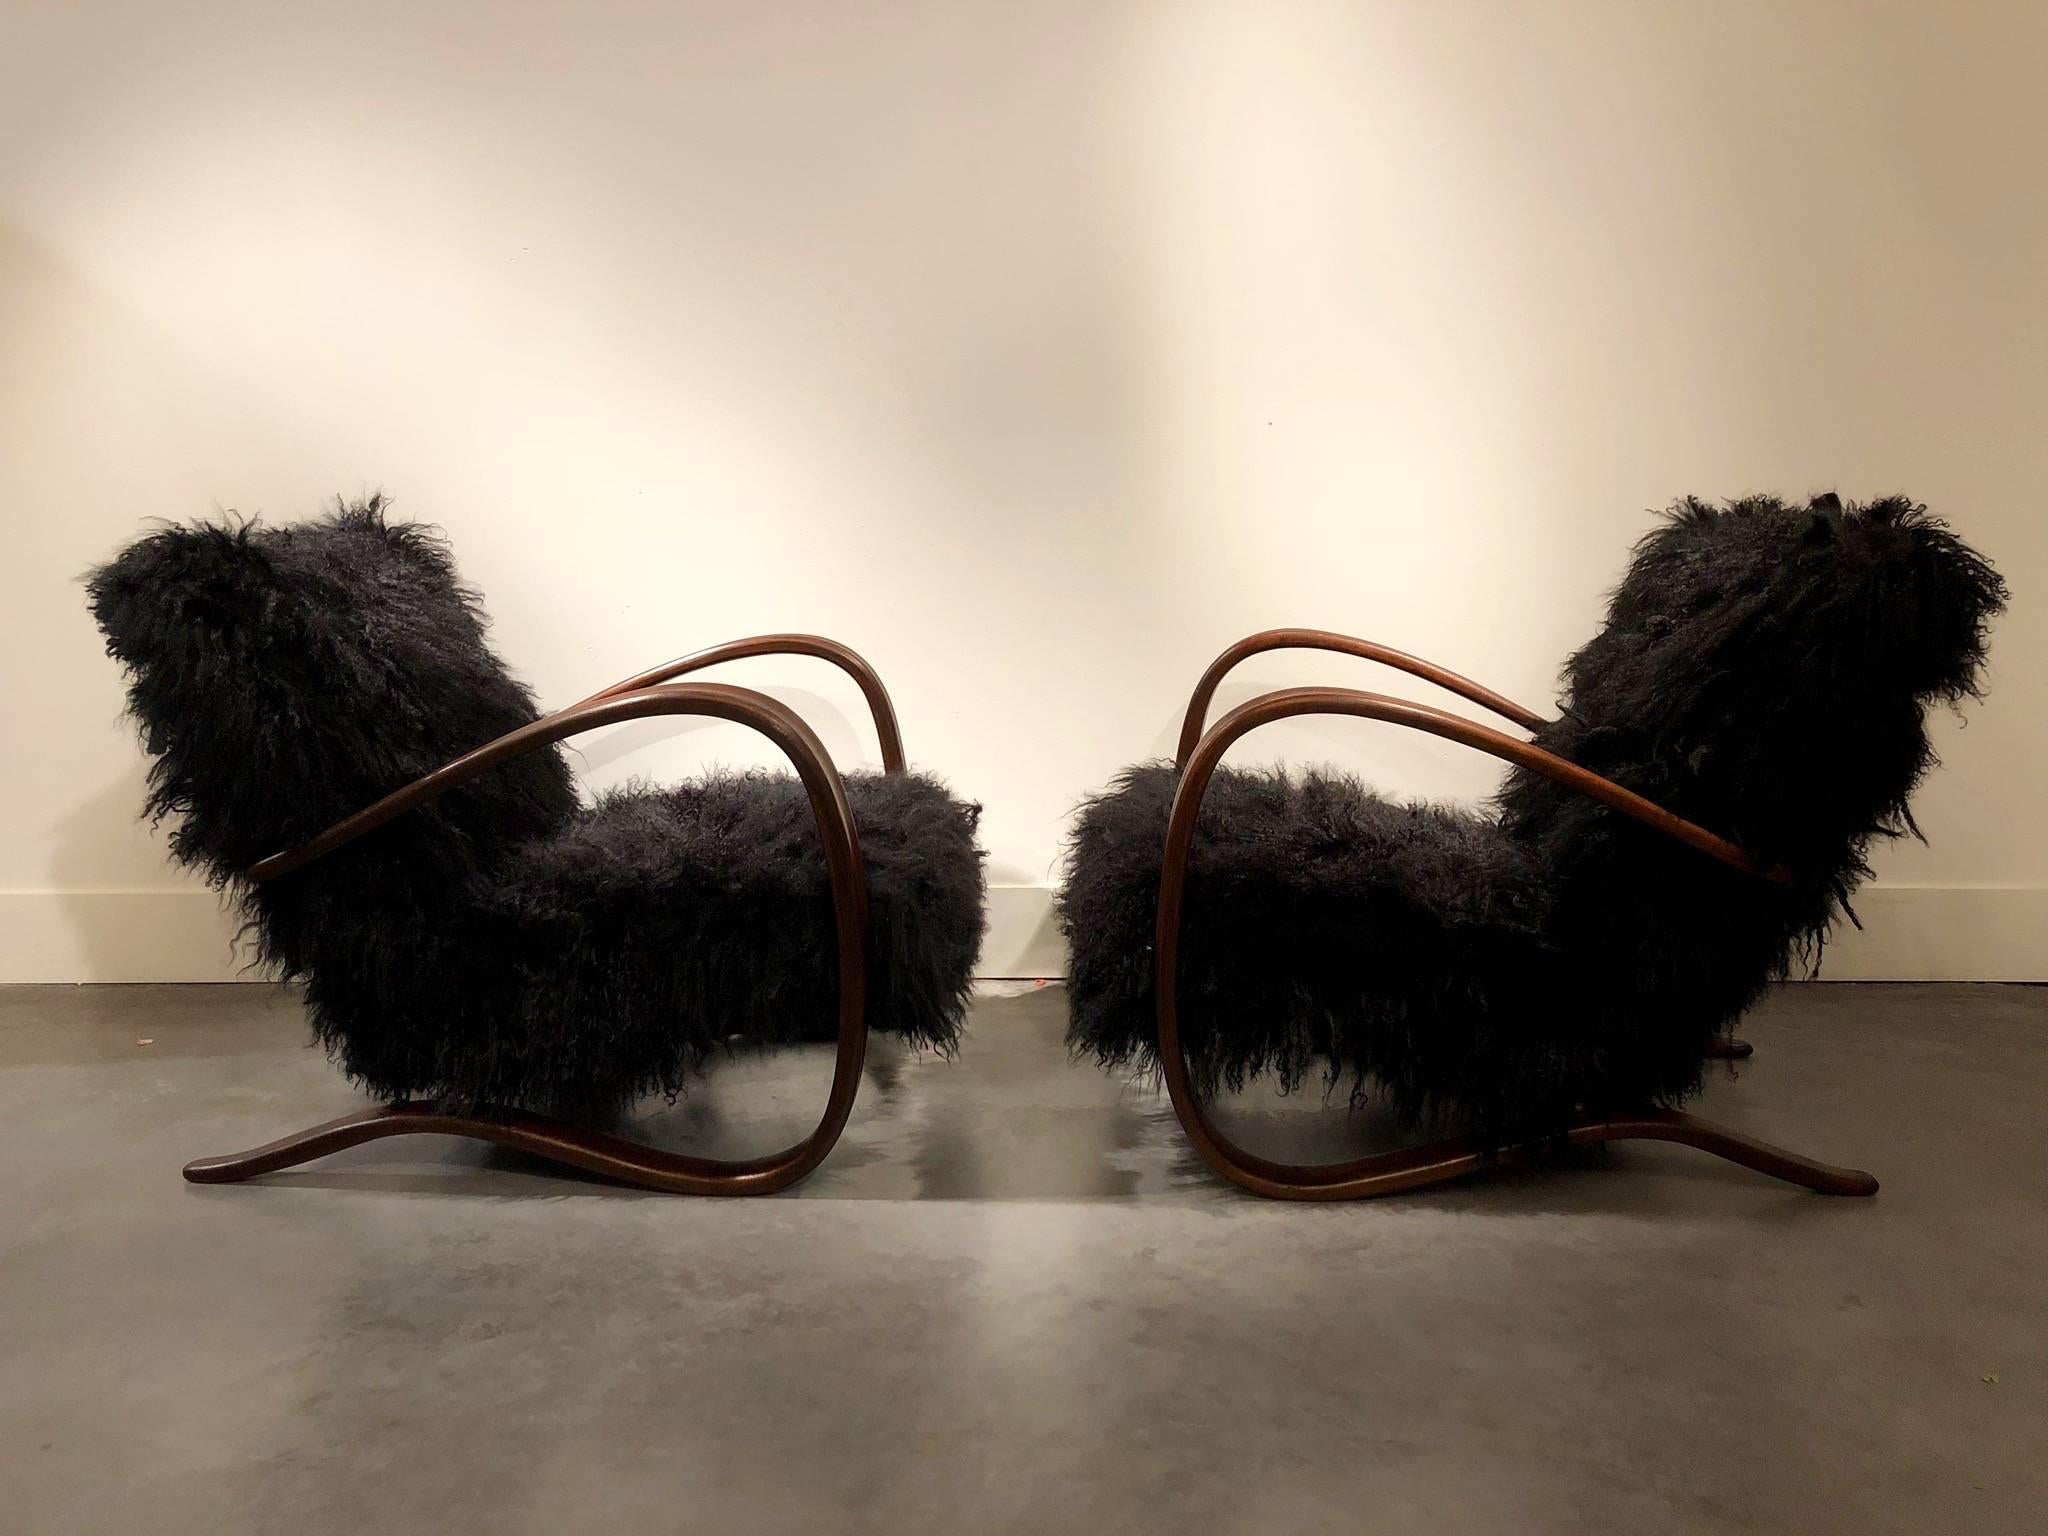 Pair of midcentury lounge chairs by the Czech designer Jindrich Halabala (1903-1978) completely refurbished and reupholstered with black sheepskin.
Designed during the 1930s, these armchairs are still astonishingly modern.
 